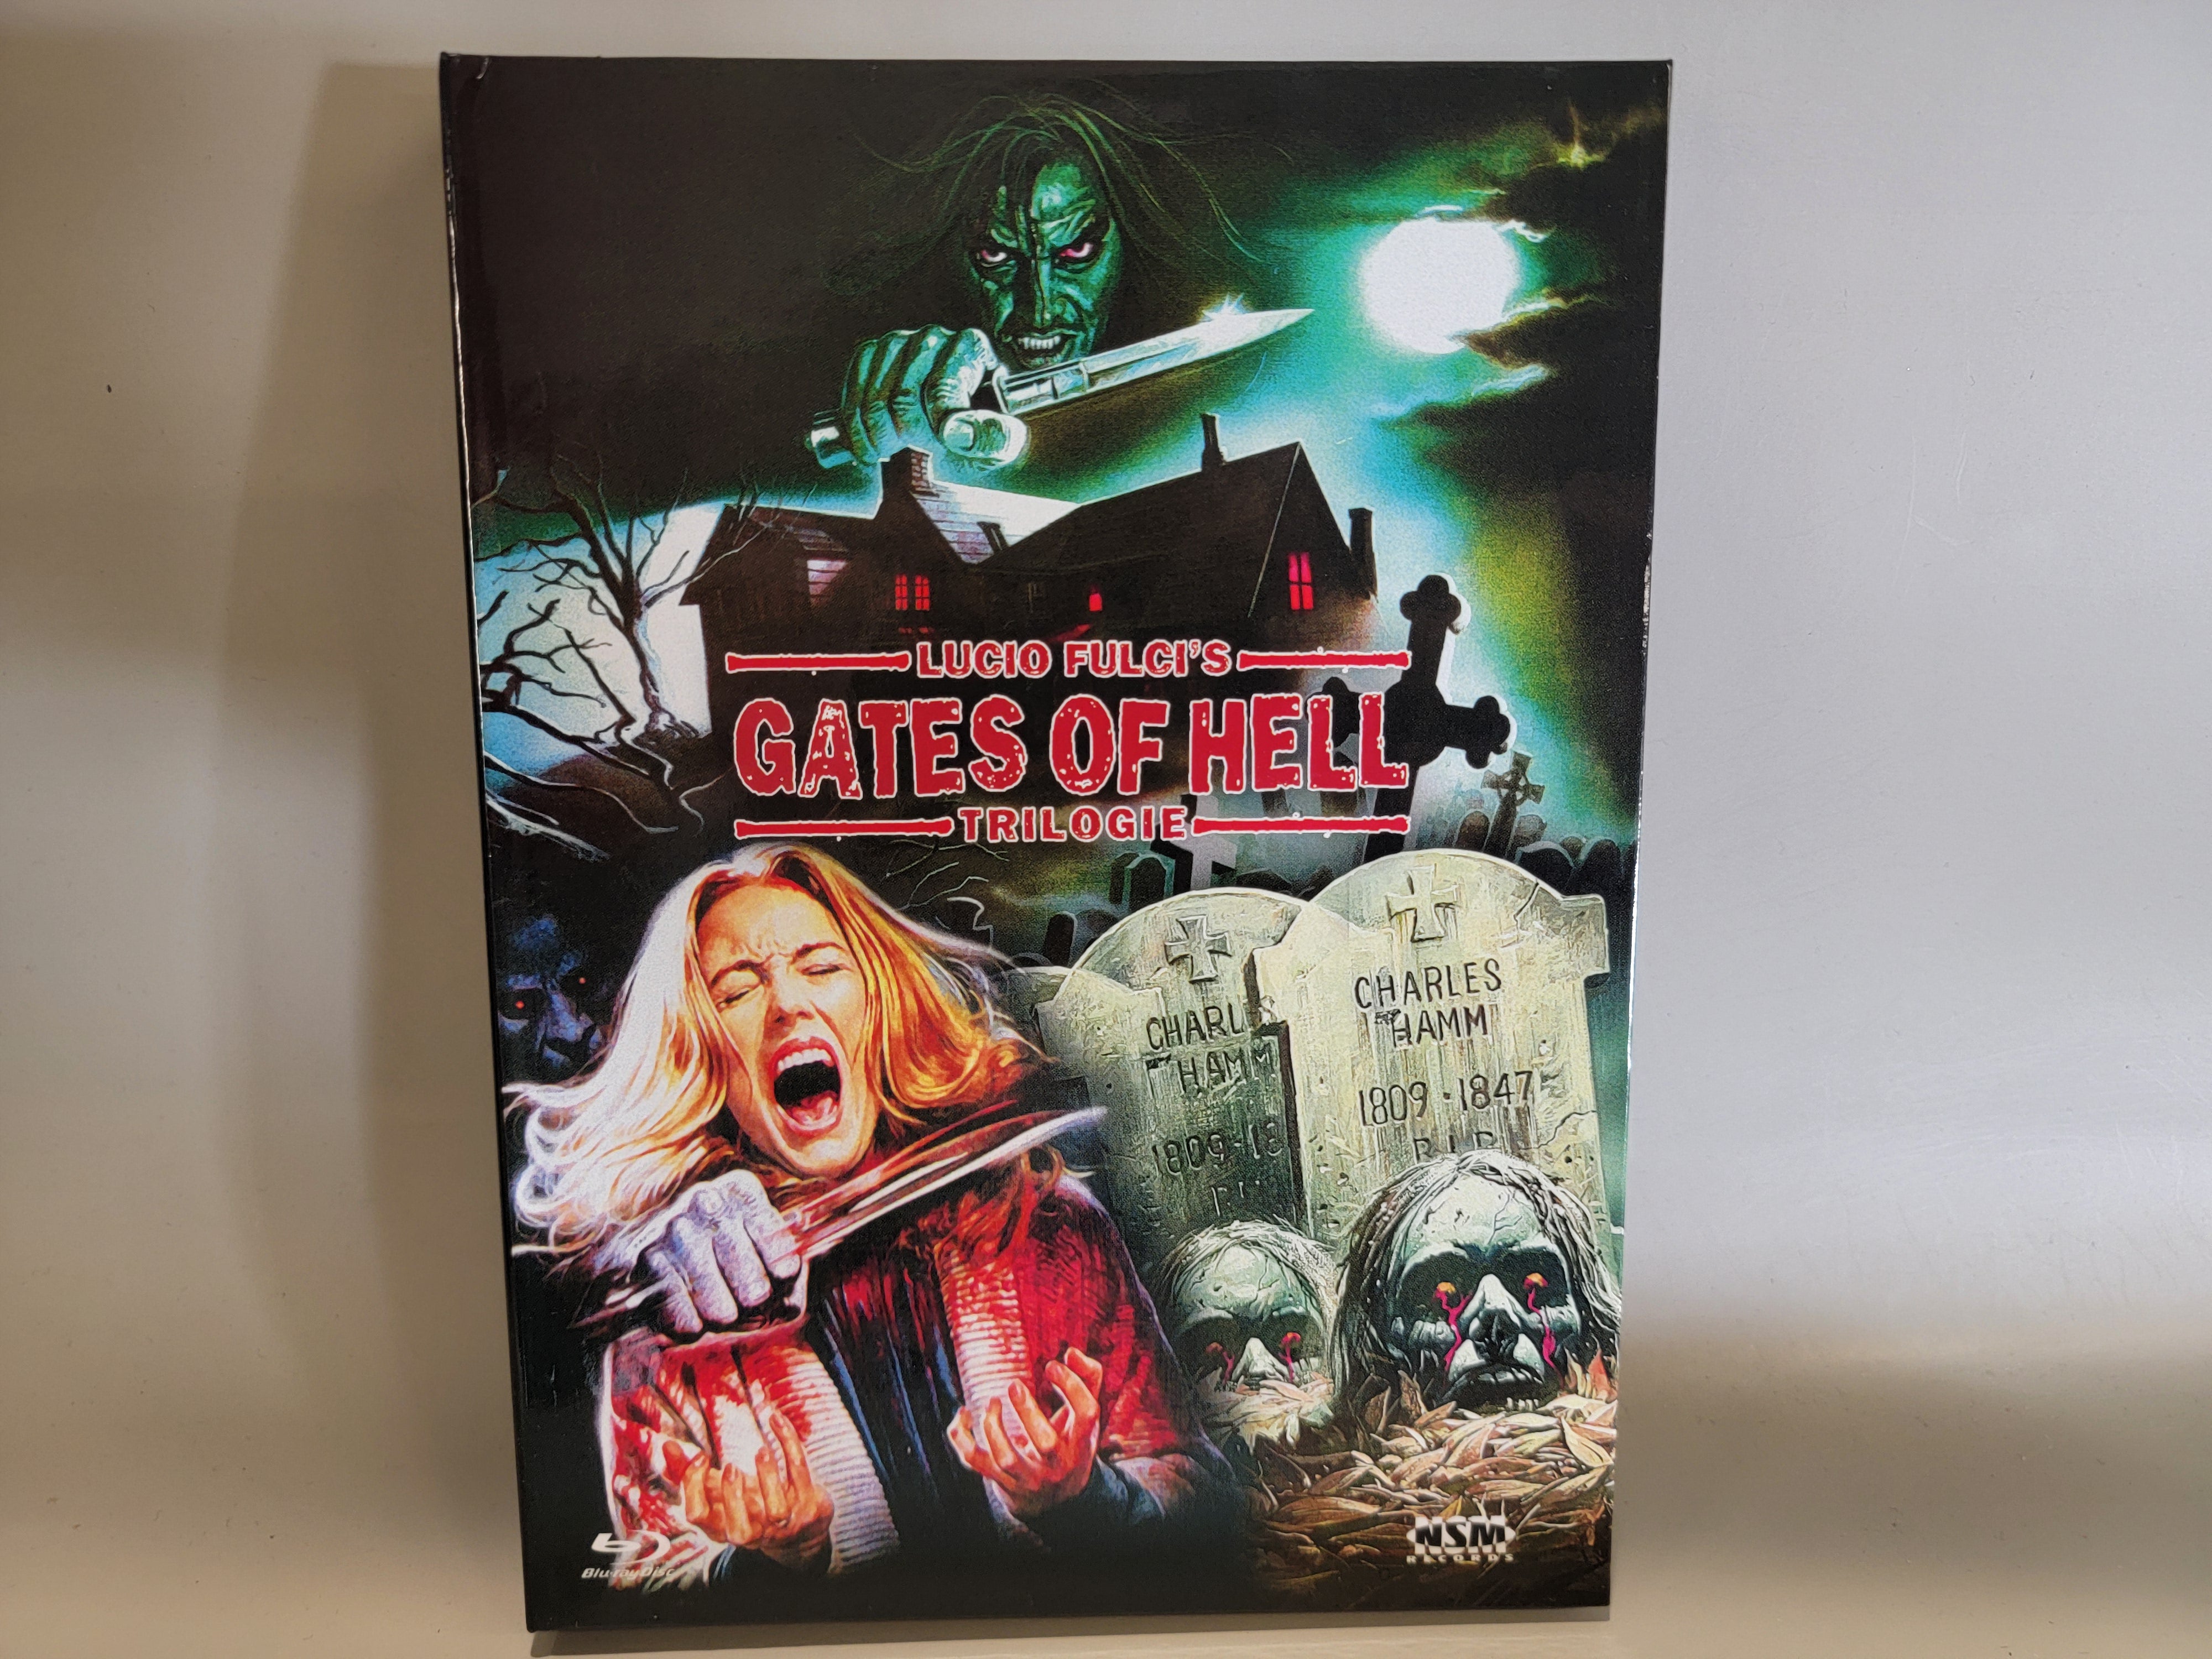 GATES OF HELL TRILOGY (REGION FREE IMPORT - LIMITED EDITION) BLU-RAY MEDIABOOK [USED]